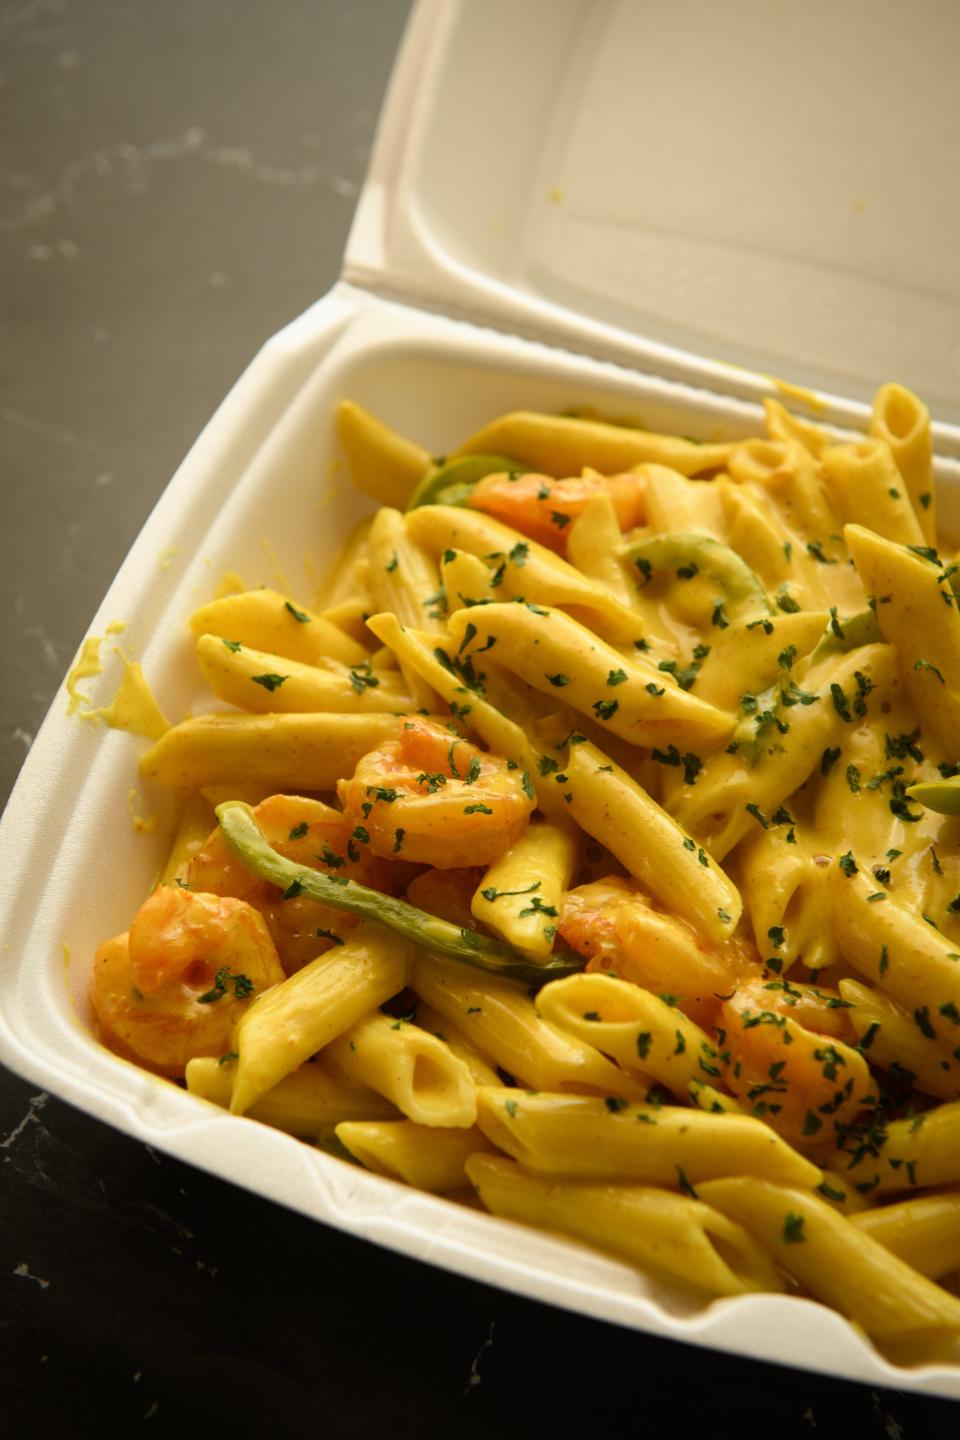 Curry shrimp pasta from A&M Island Cafe in Midway Center on Bragg Blvd.